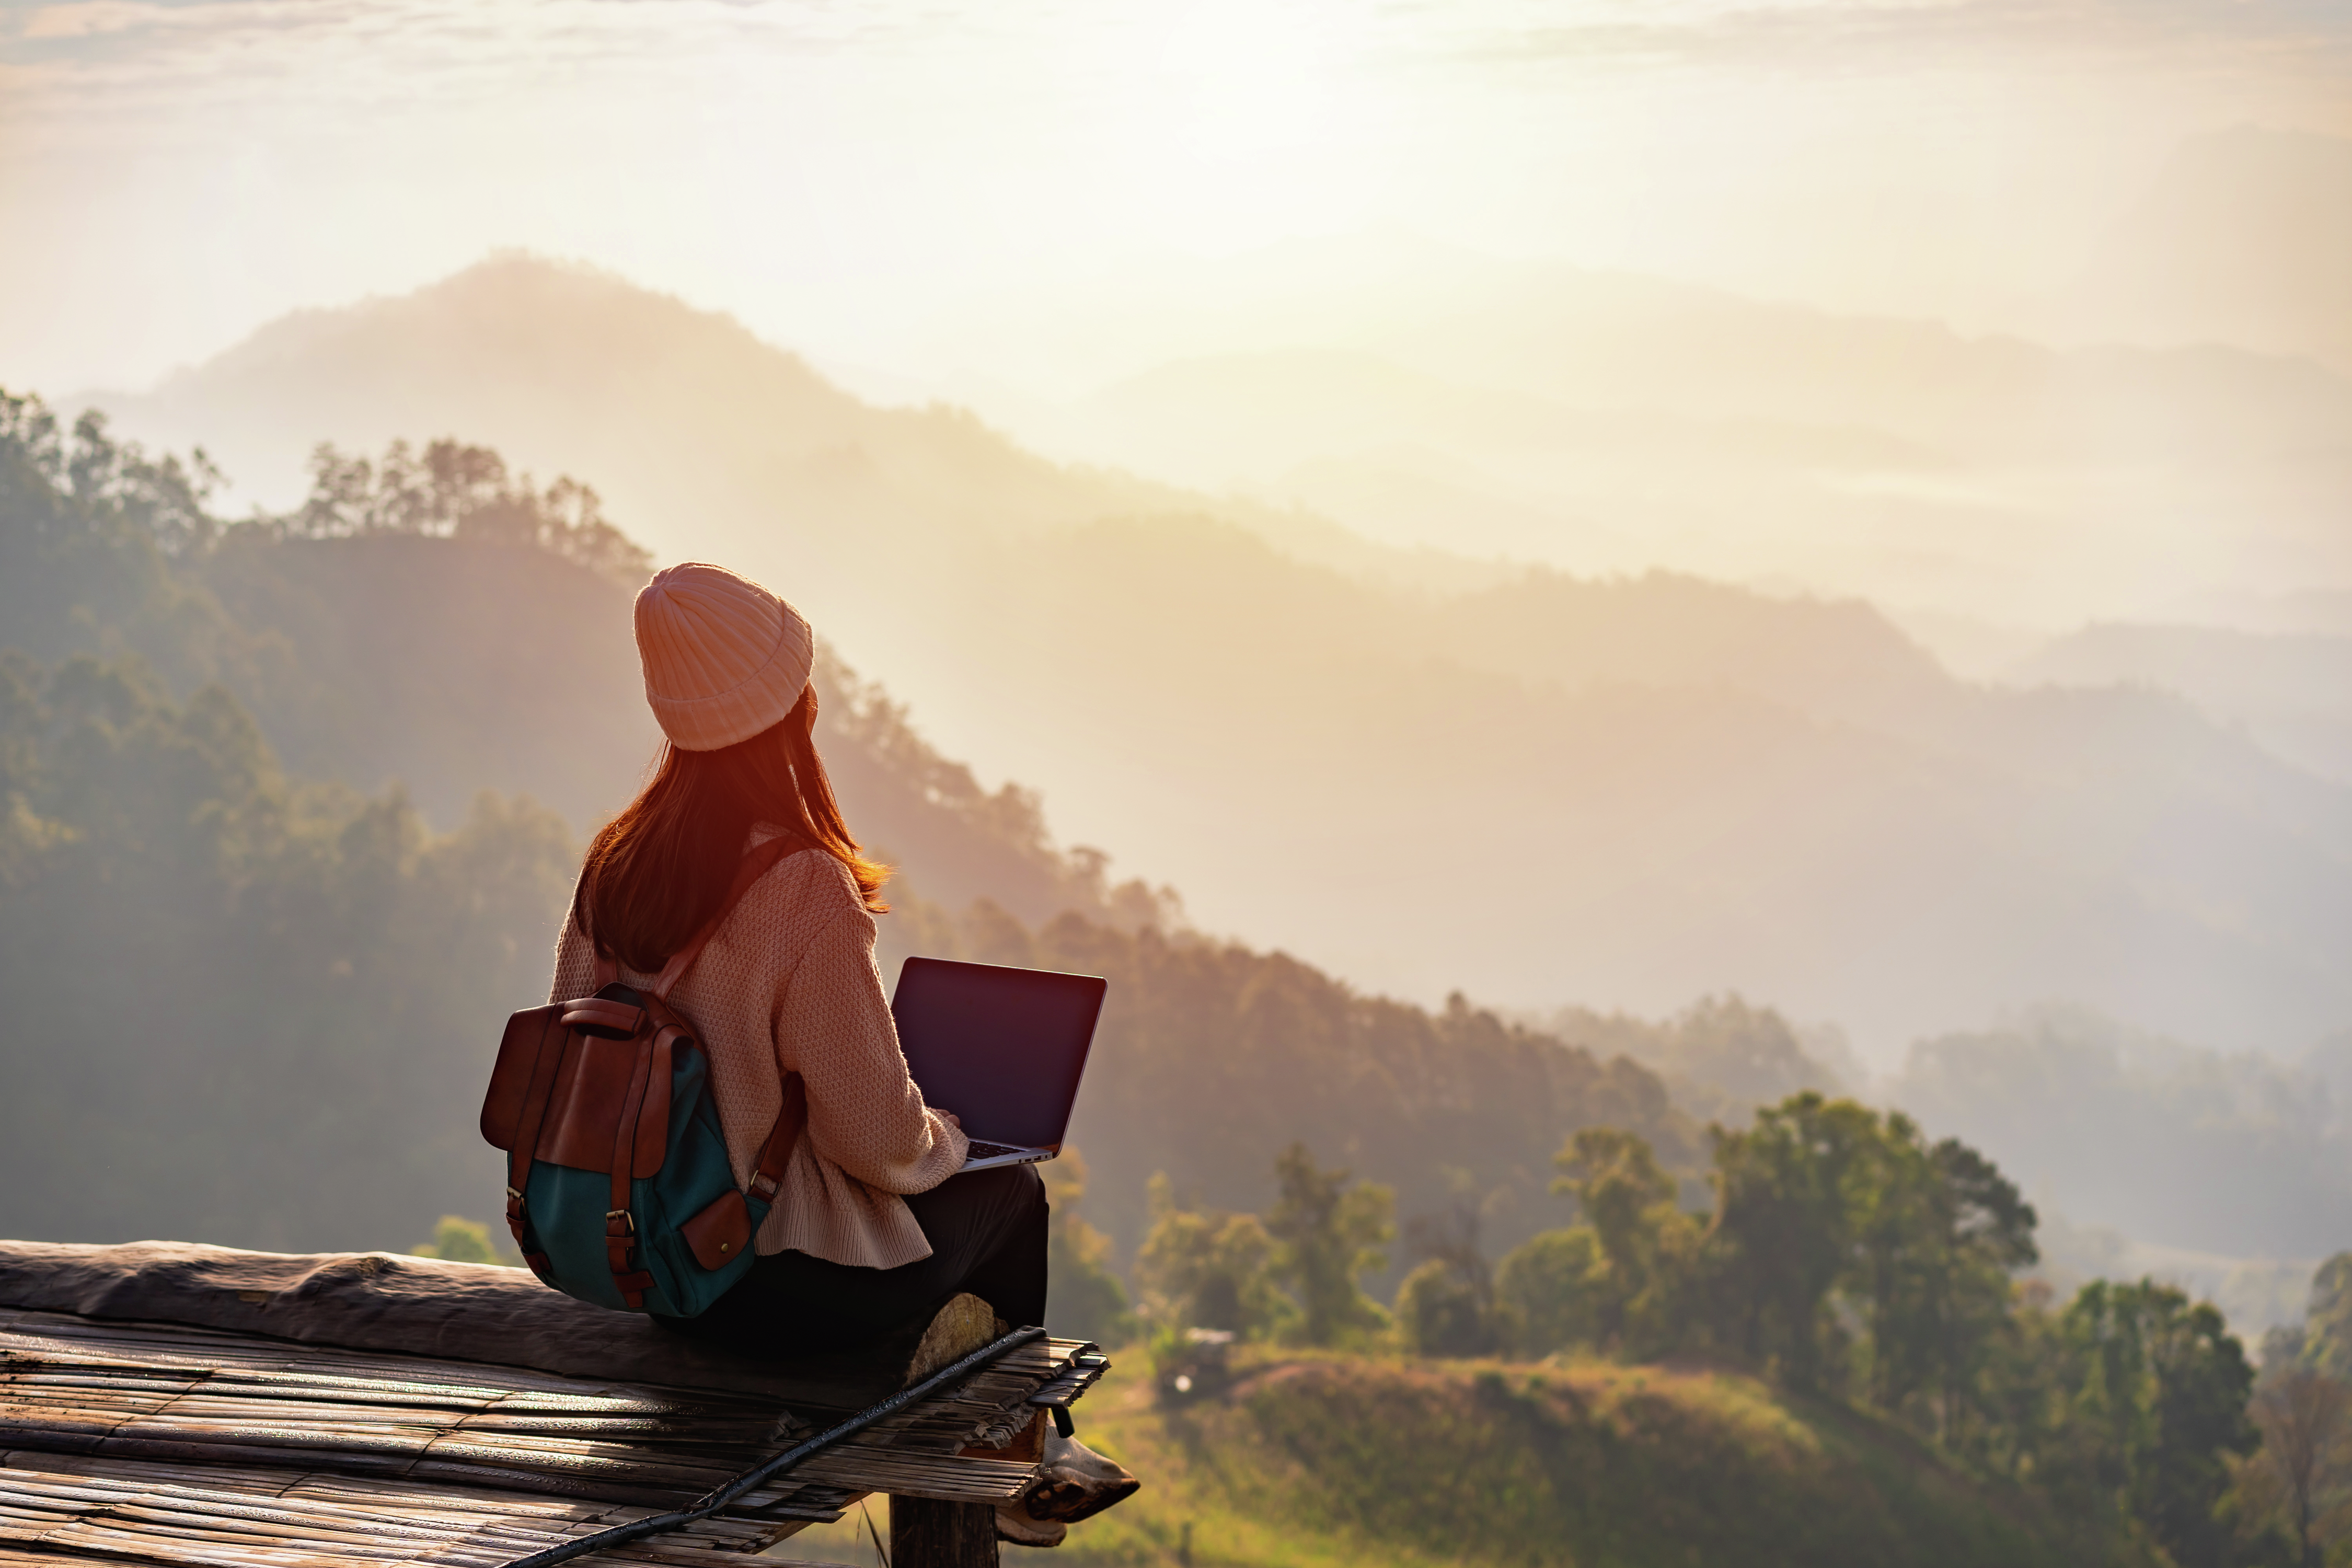 It's becoming easier to be a digital nomad overseas